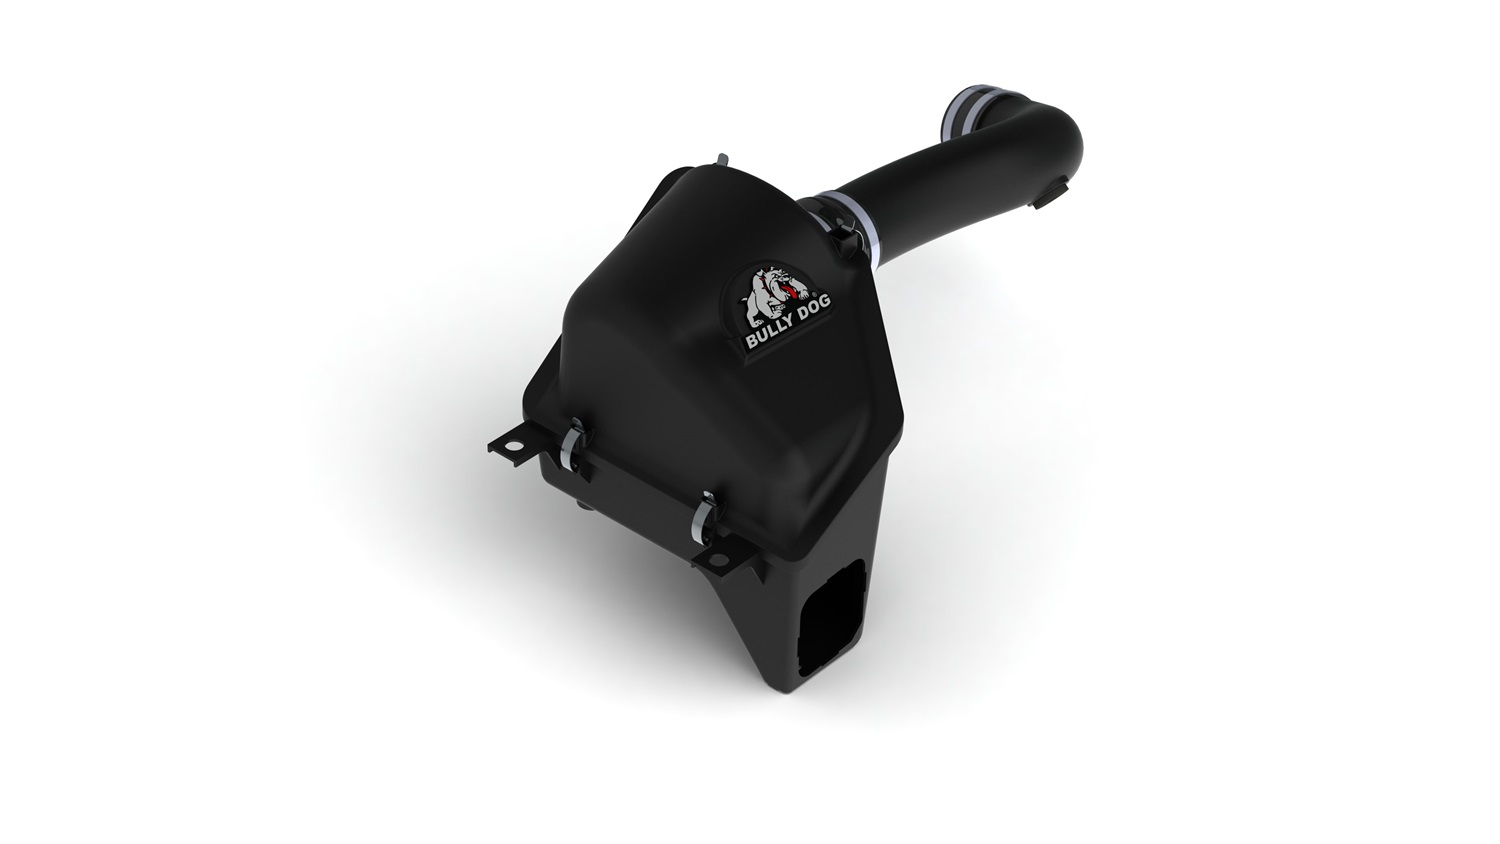 Bully Dog Bully Dog 52200 Rapid Flow Cold Air Induction Intake